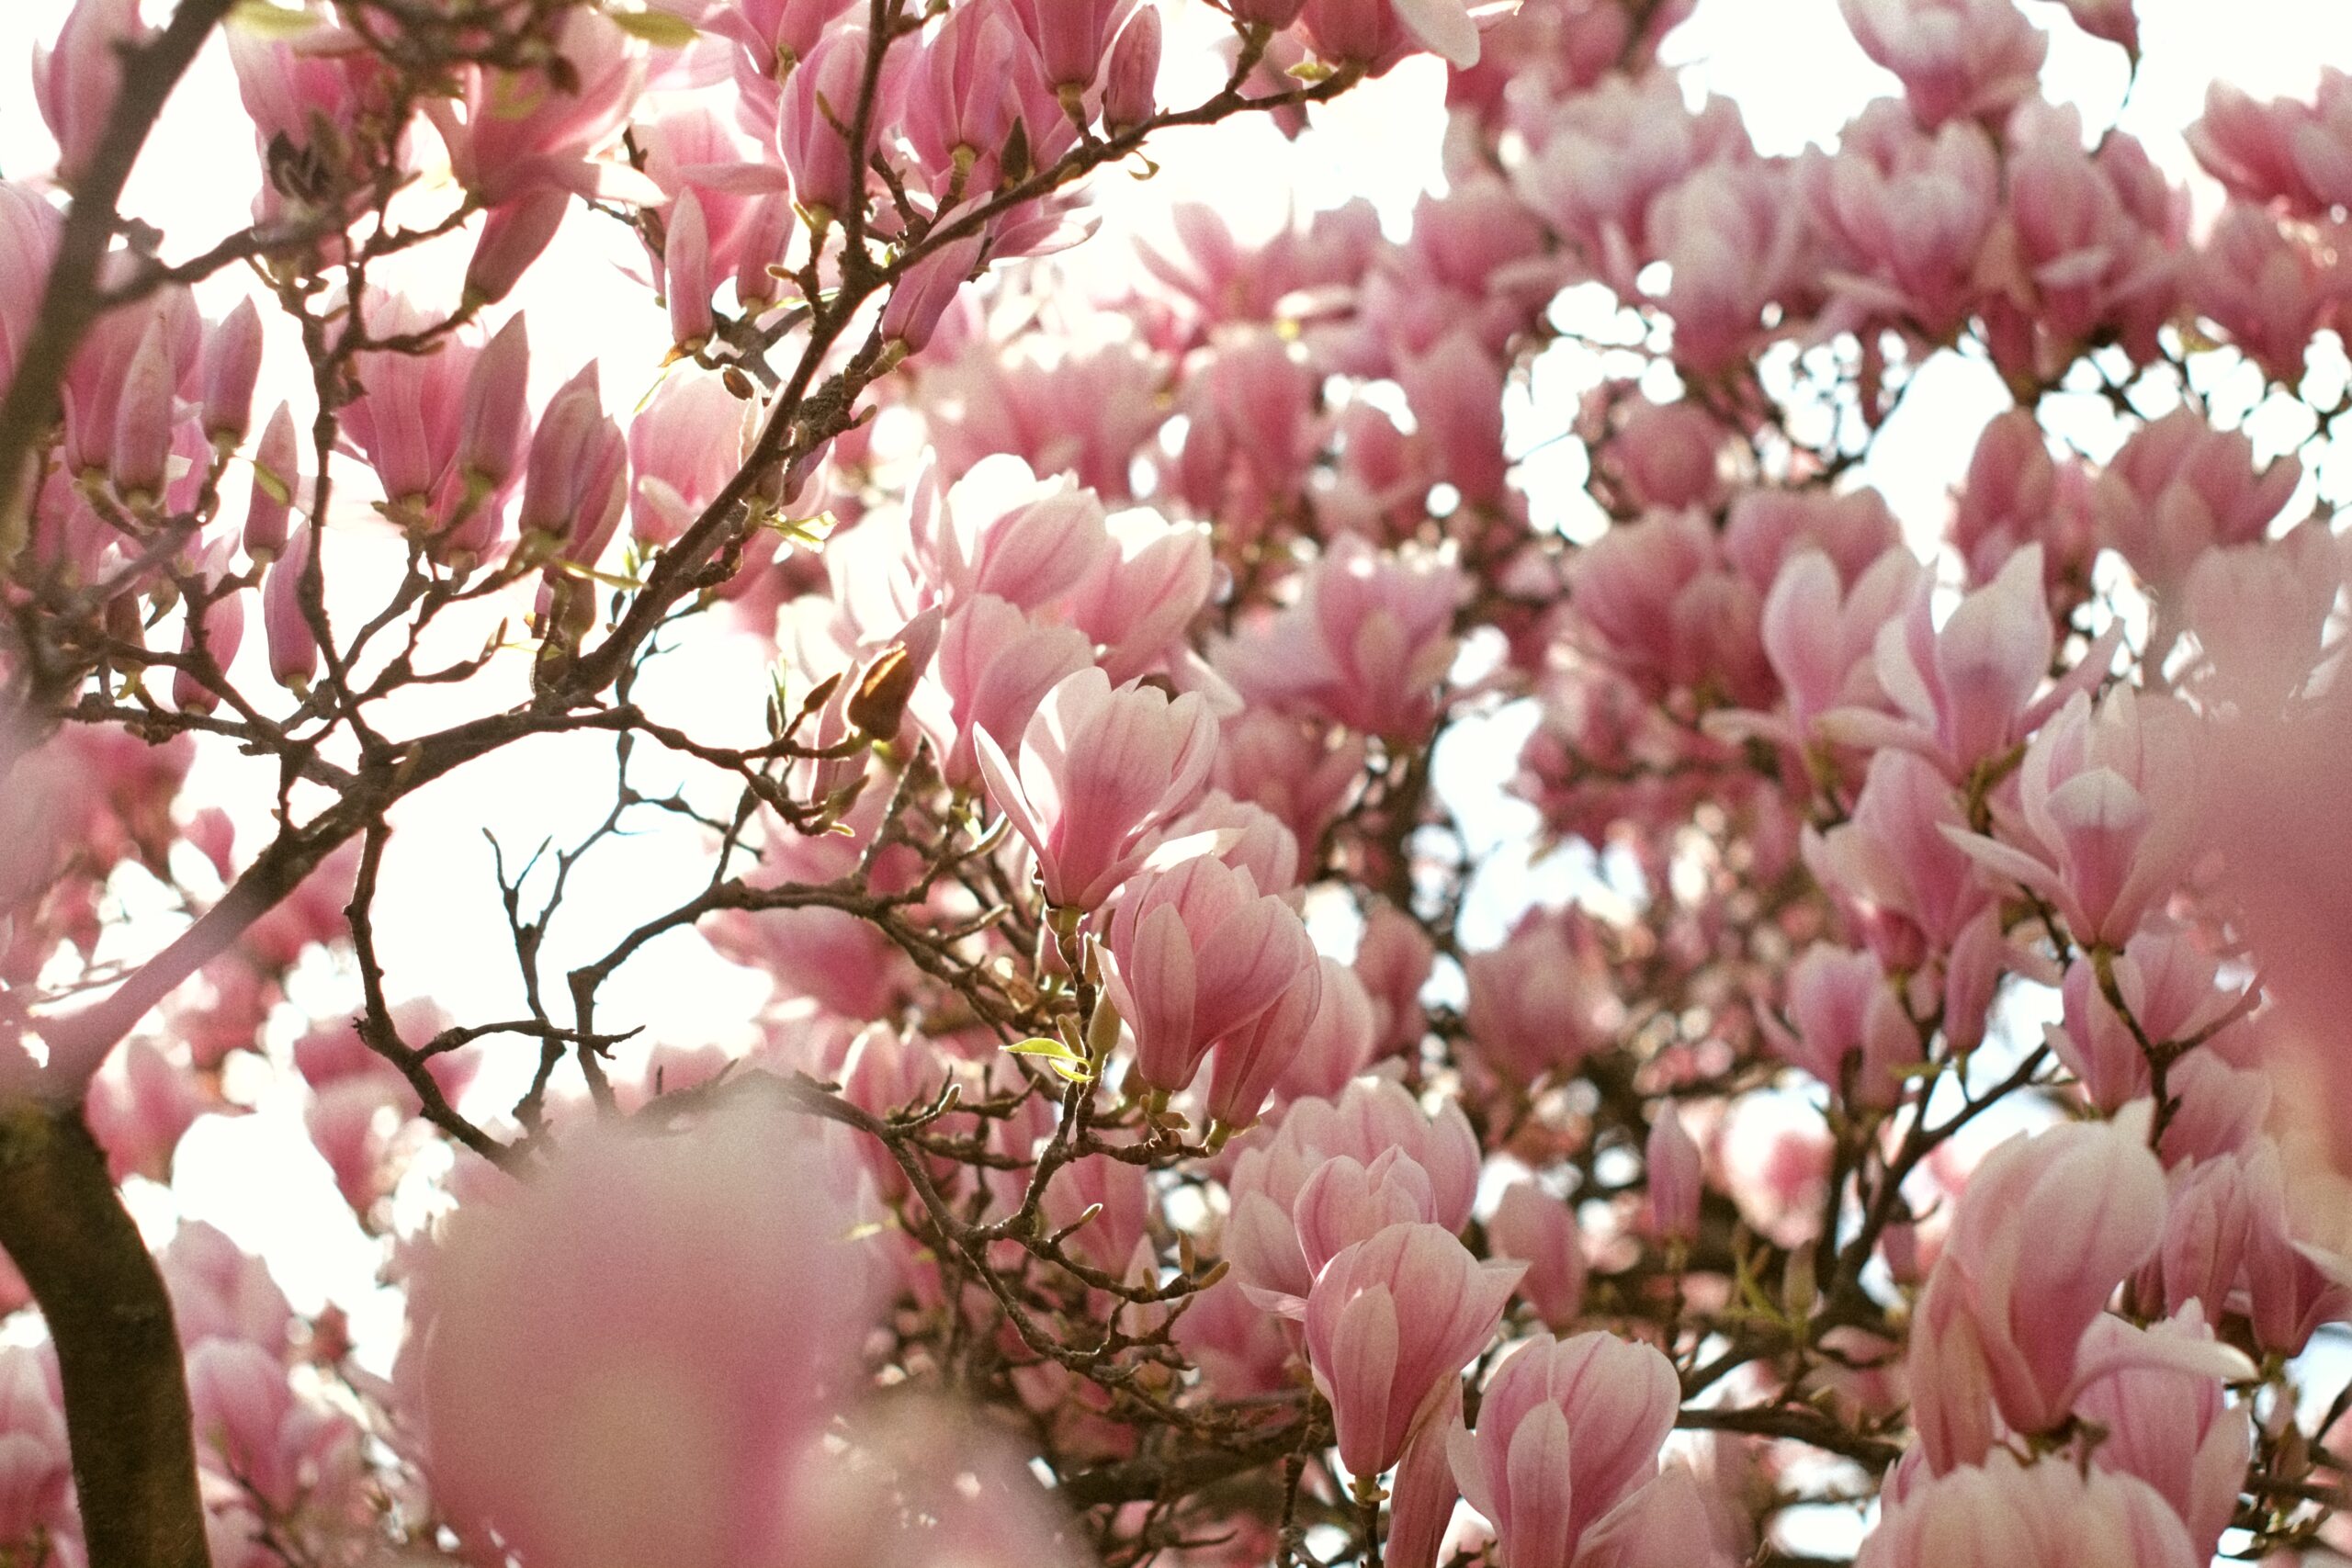 A lot of magnolia blossoms on a tree